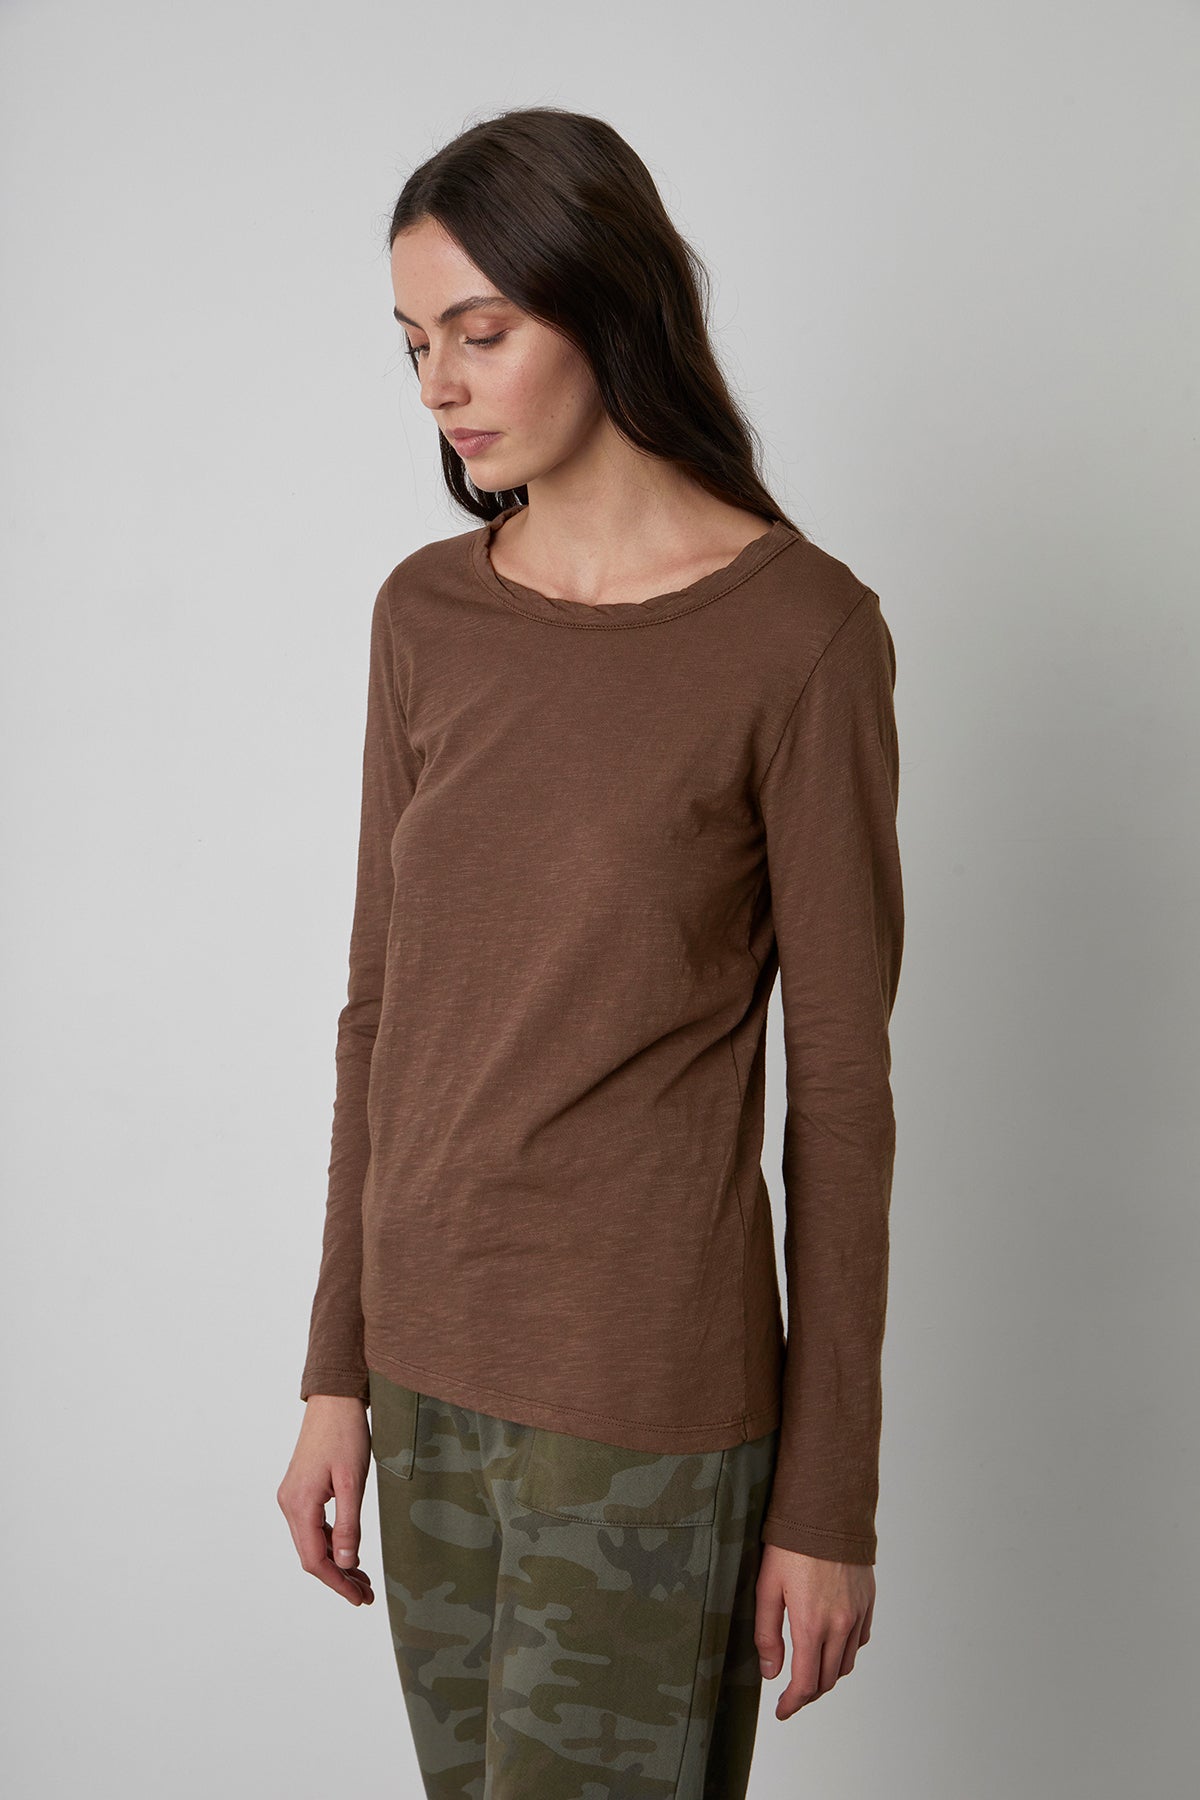   Lizzie Tee Chocolate with Skye Sweatpant Nettle Front & Side 